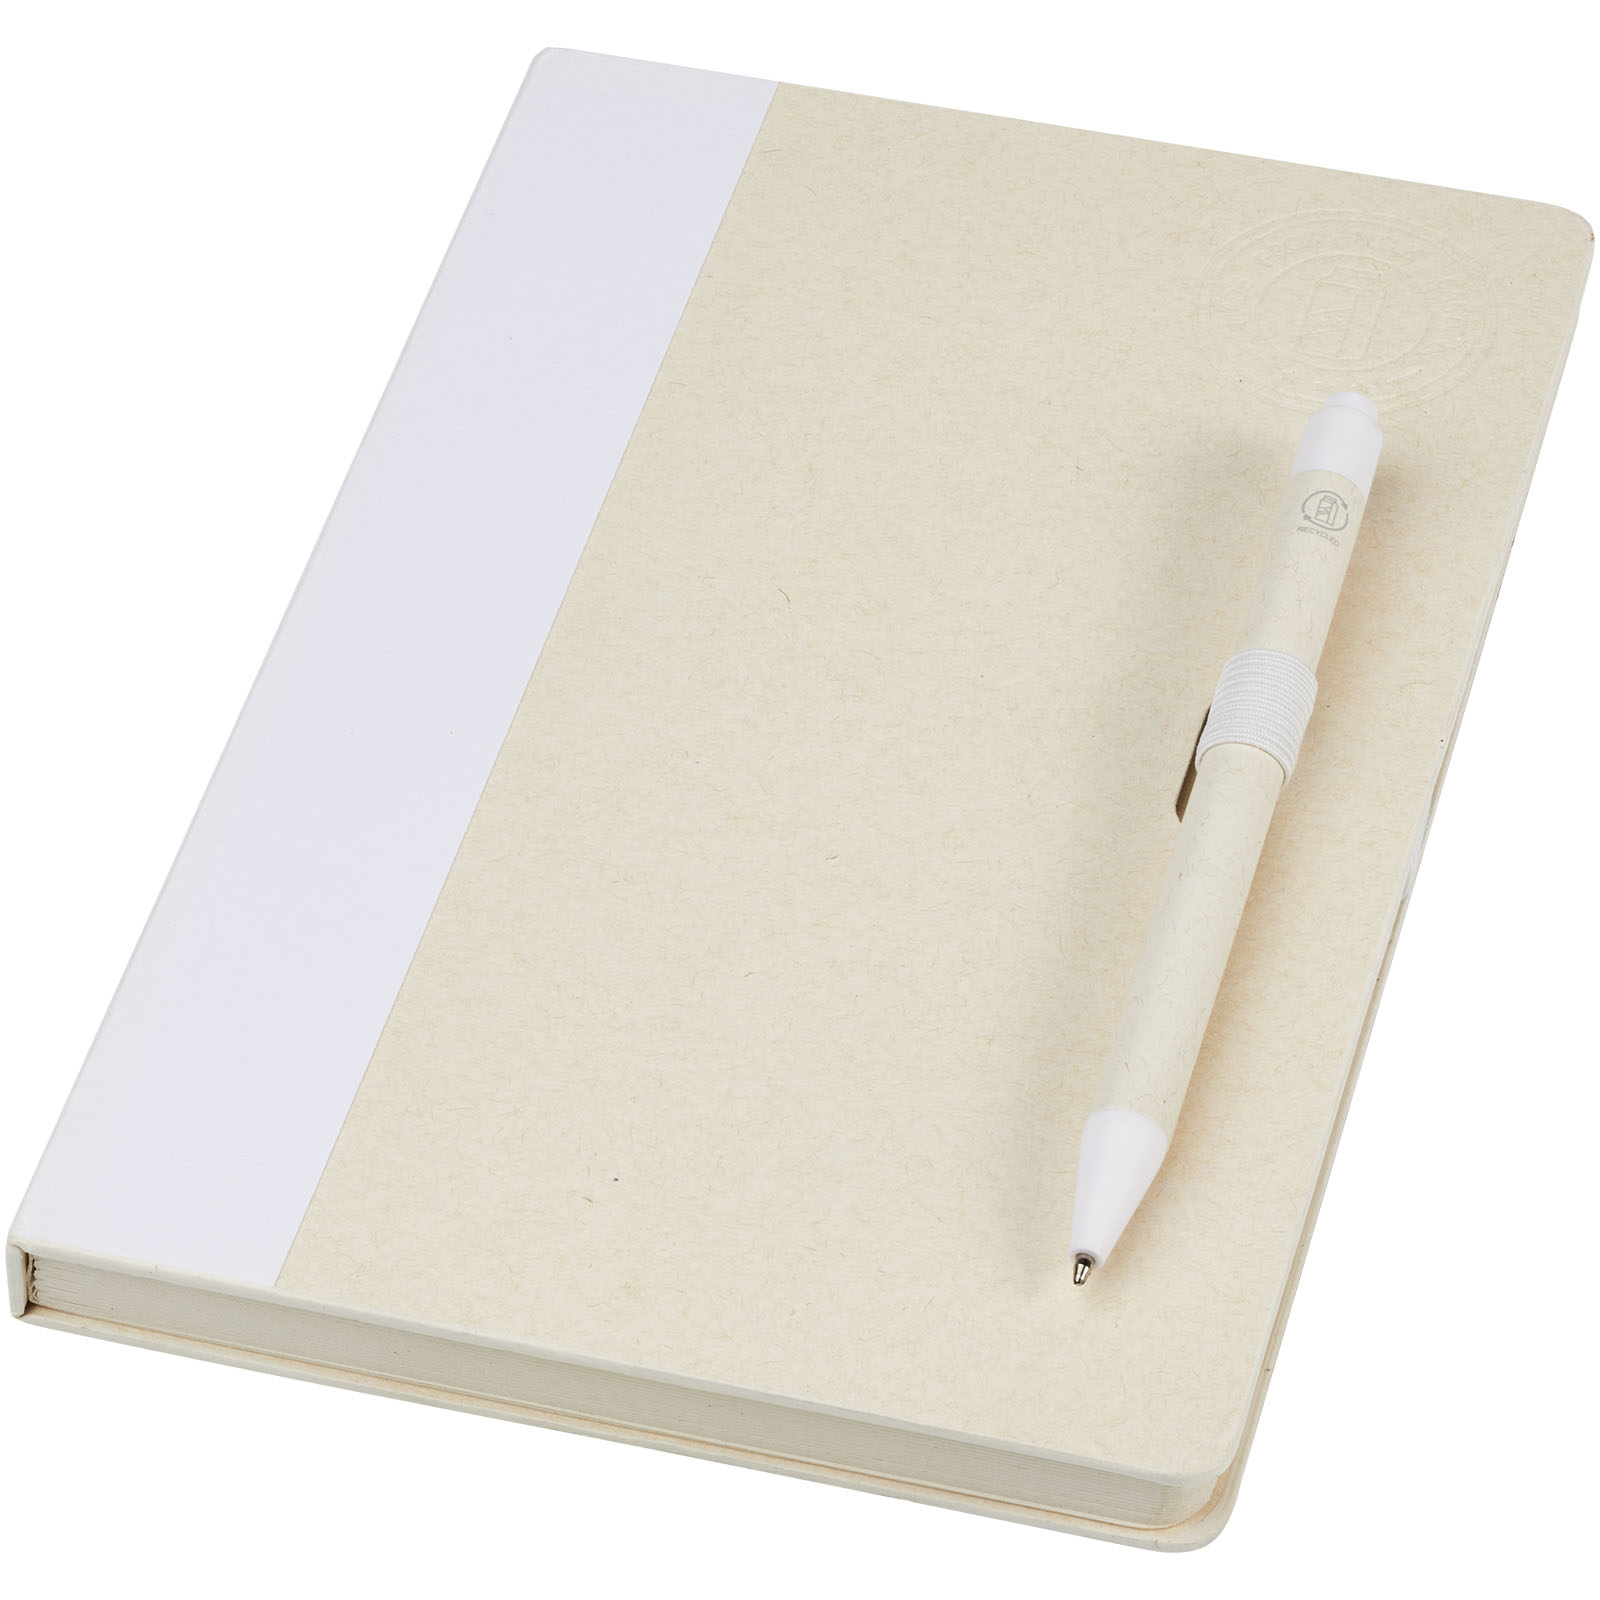 Advertising Hard cover notebooks - Dairy Dream A5 size reference recycled milk cartons notebook and ballpoint pen set